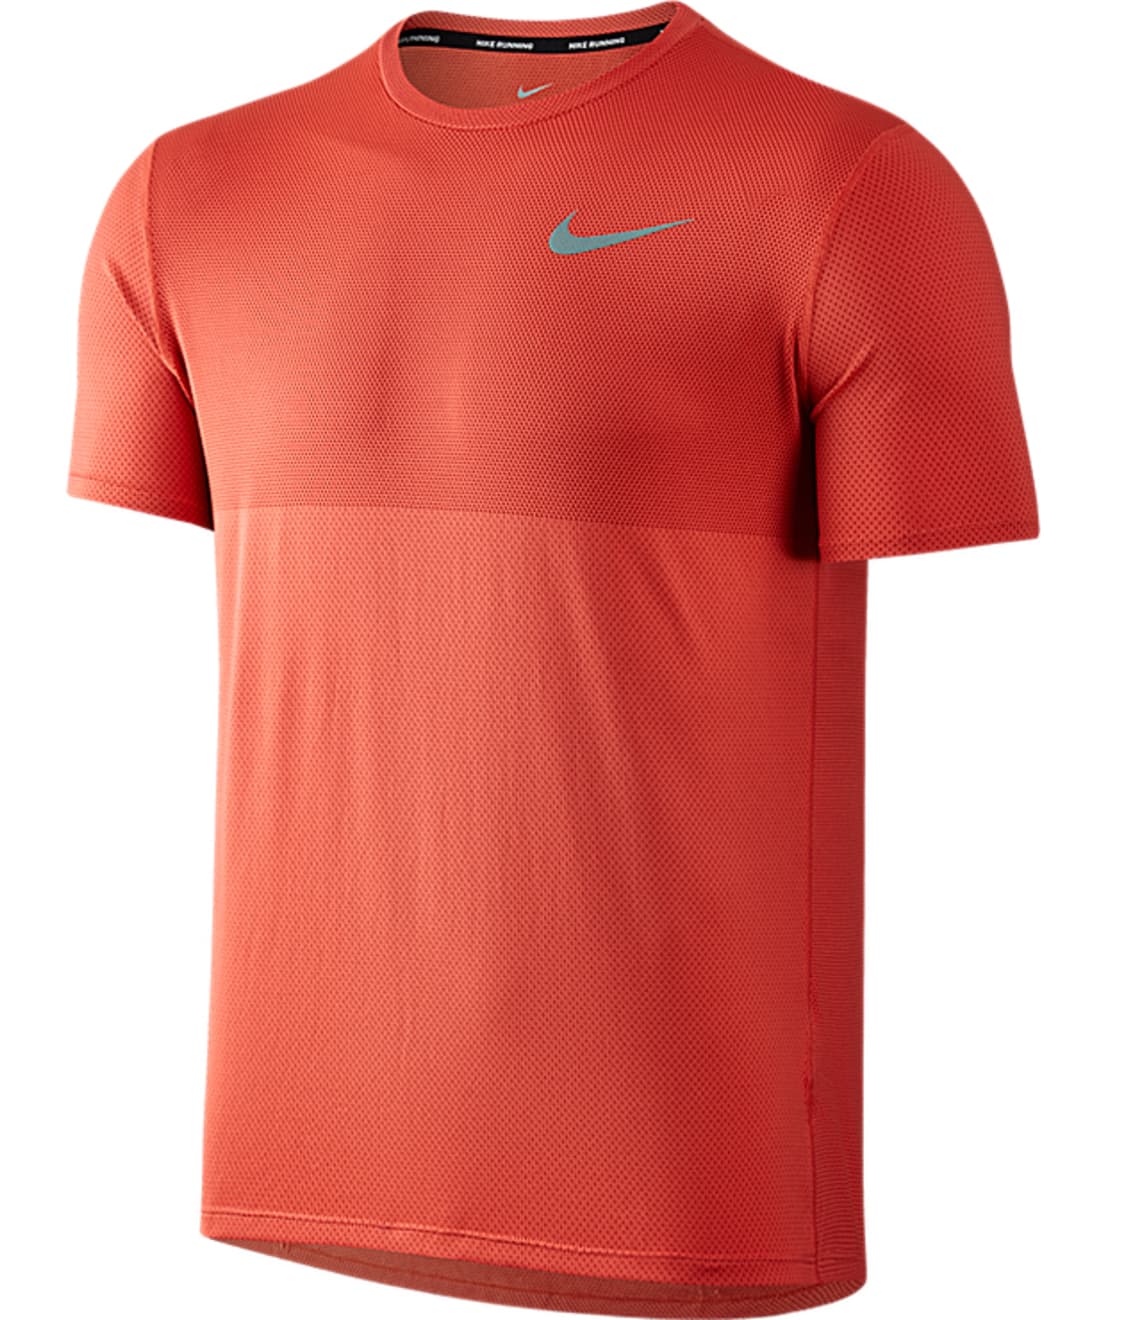 Nike Cooling Relay Dri-FIT T-Shirt & Reviews | Bare Necessities (Style 833580)